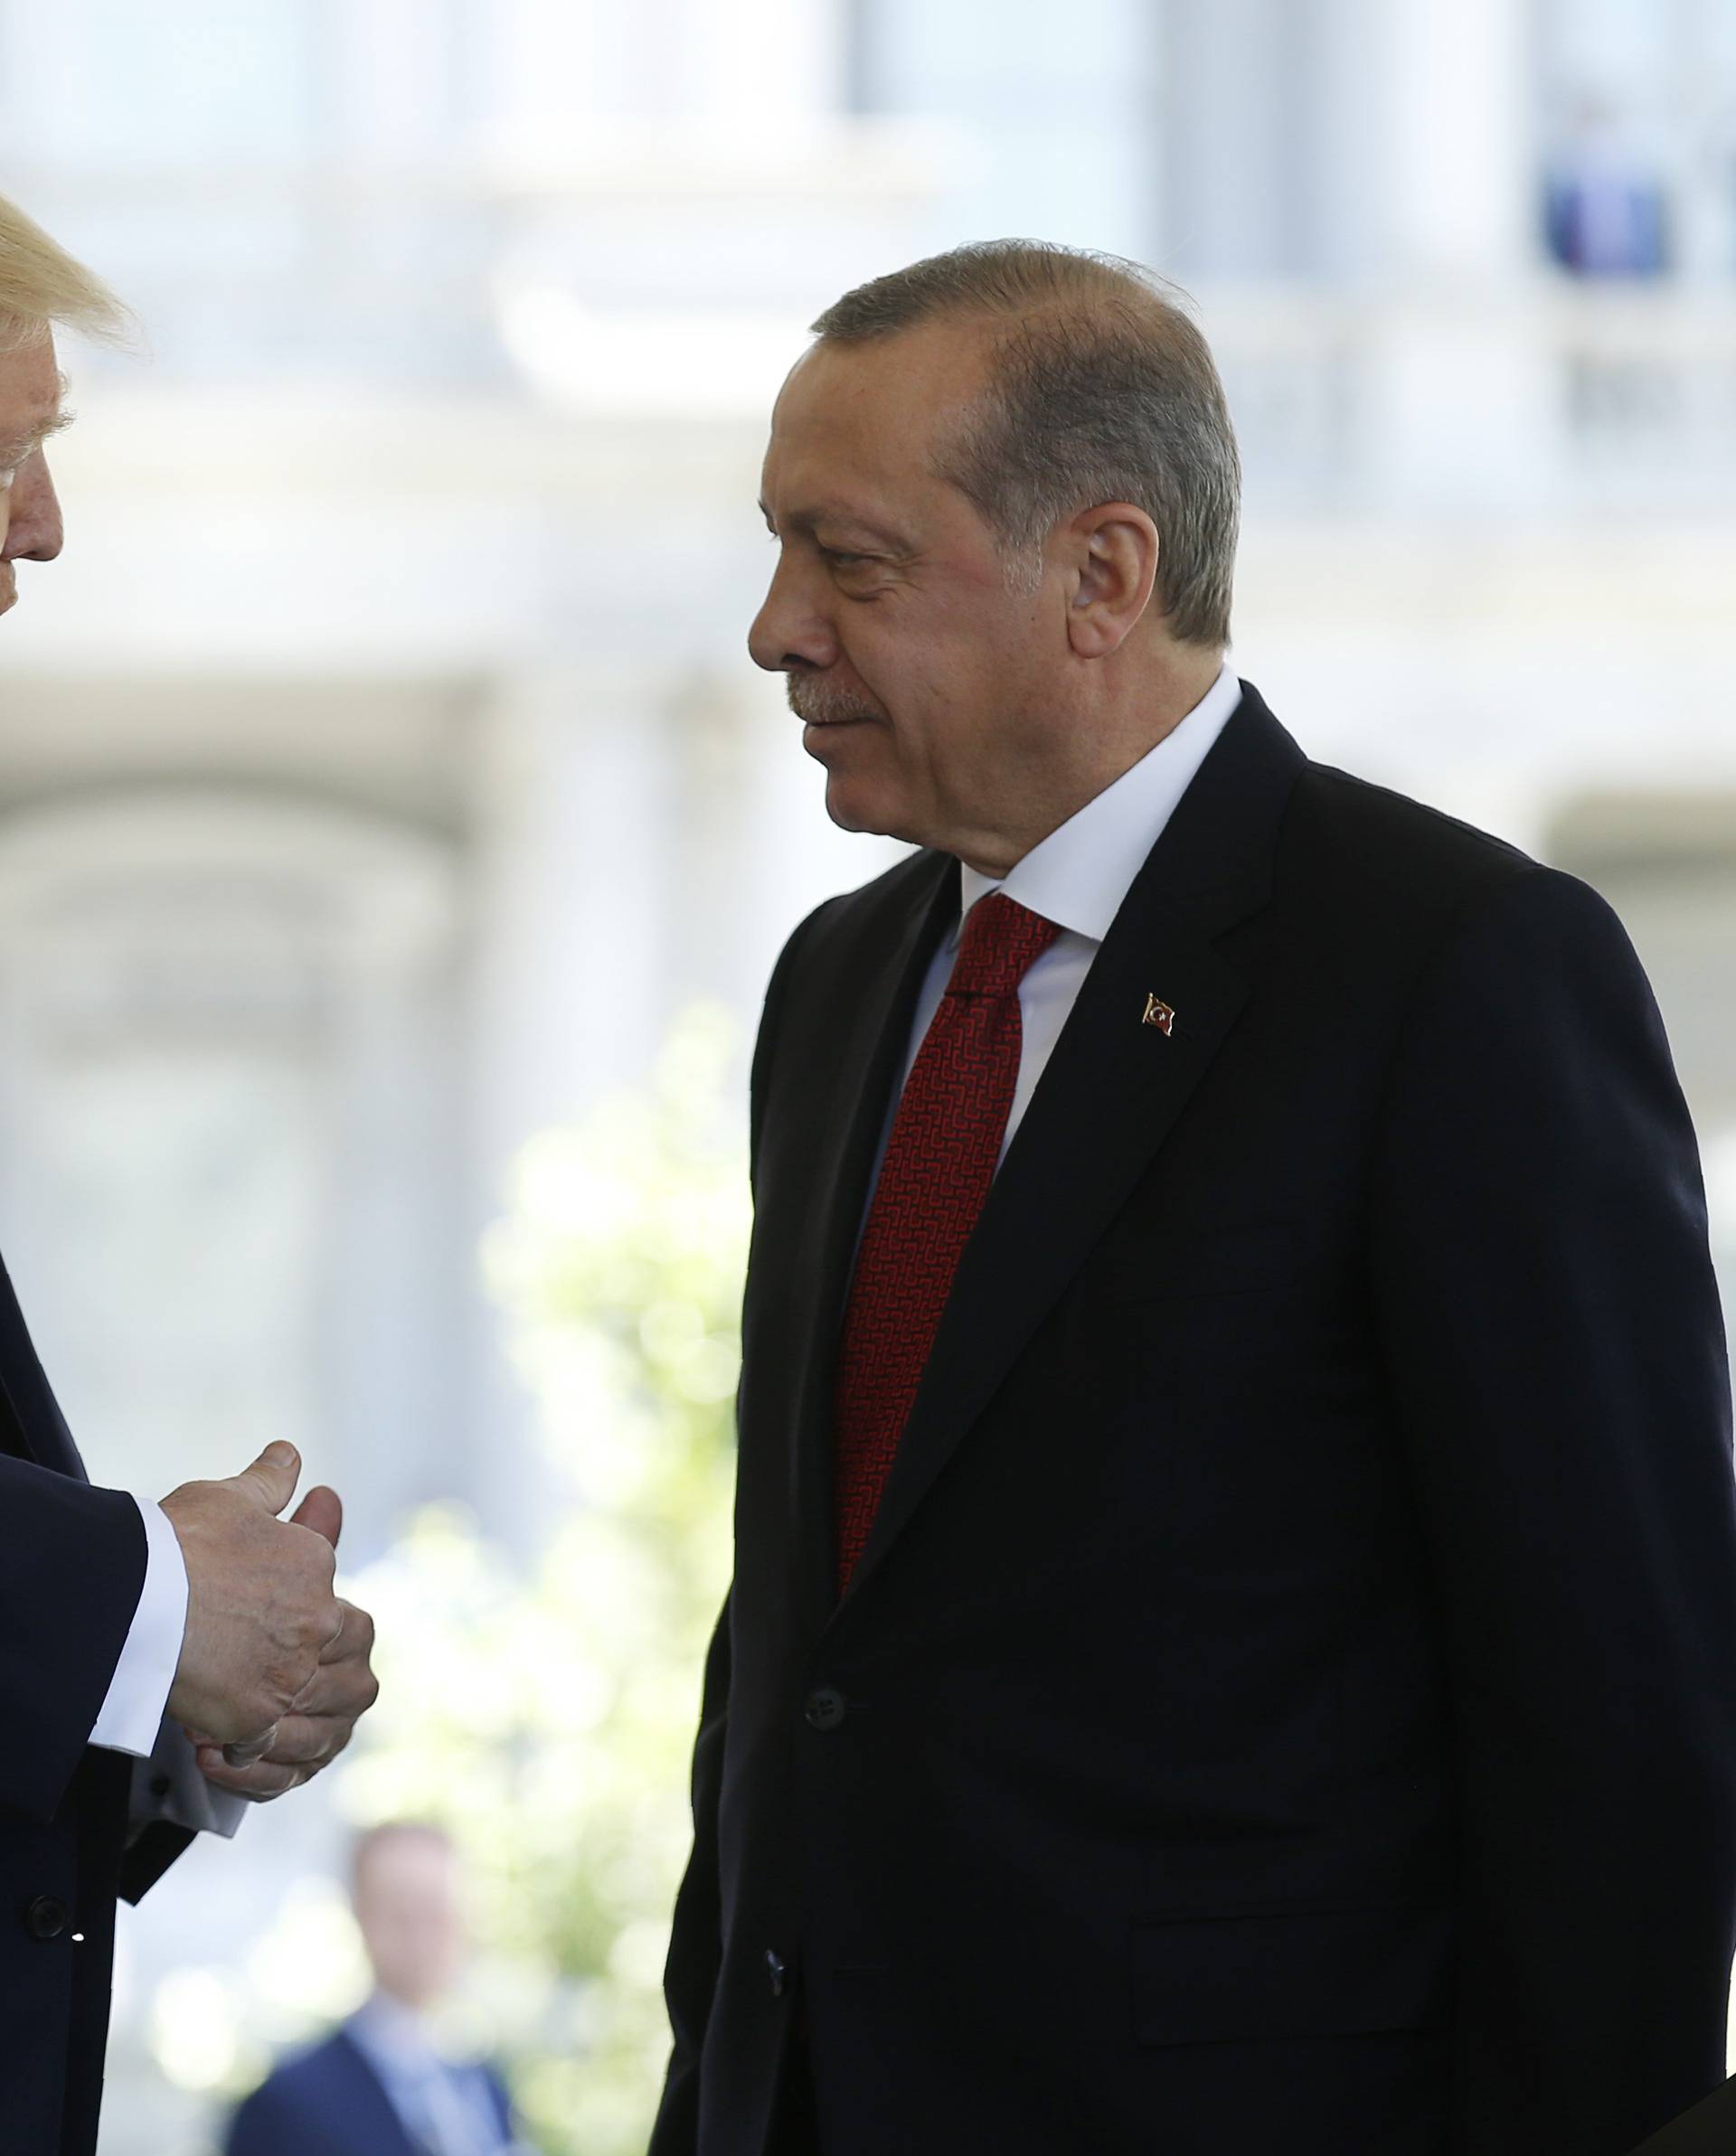 President Trump talks with Turkey's President Erdogan at the entrance to the West Wing of the White House in Washington